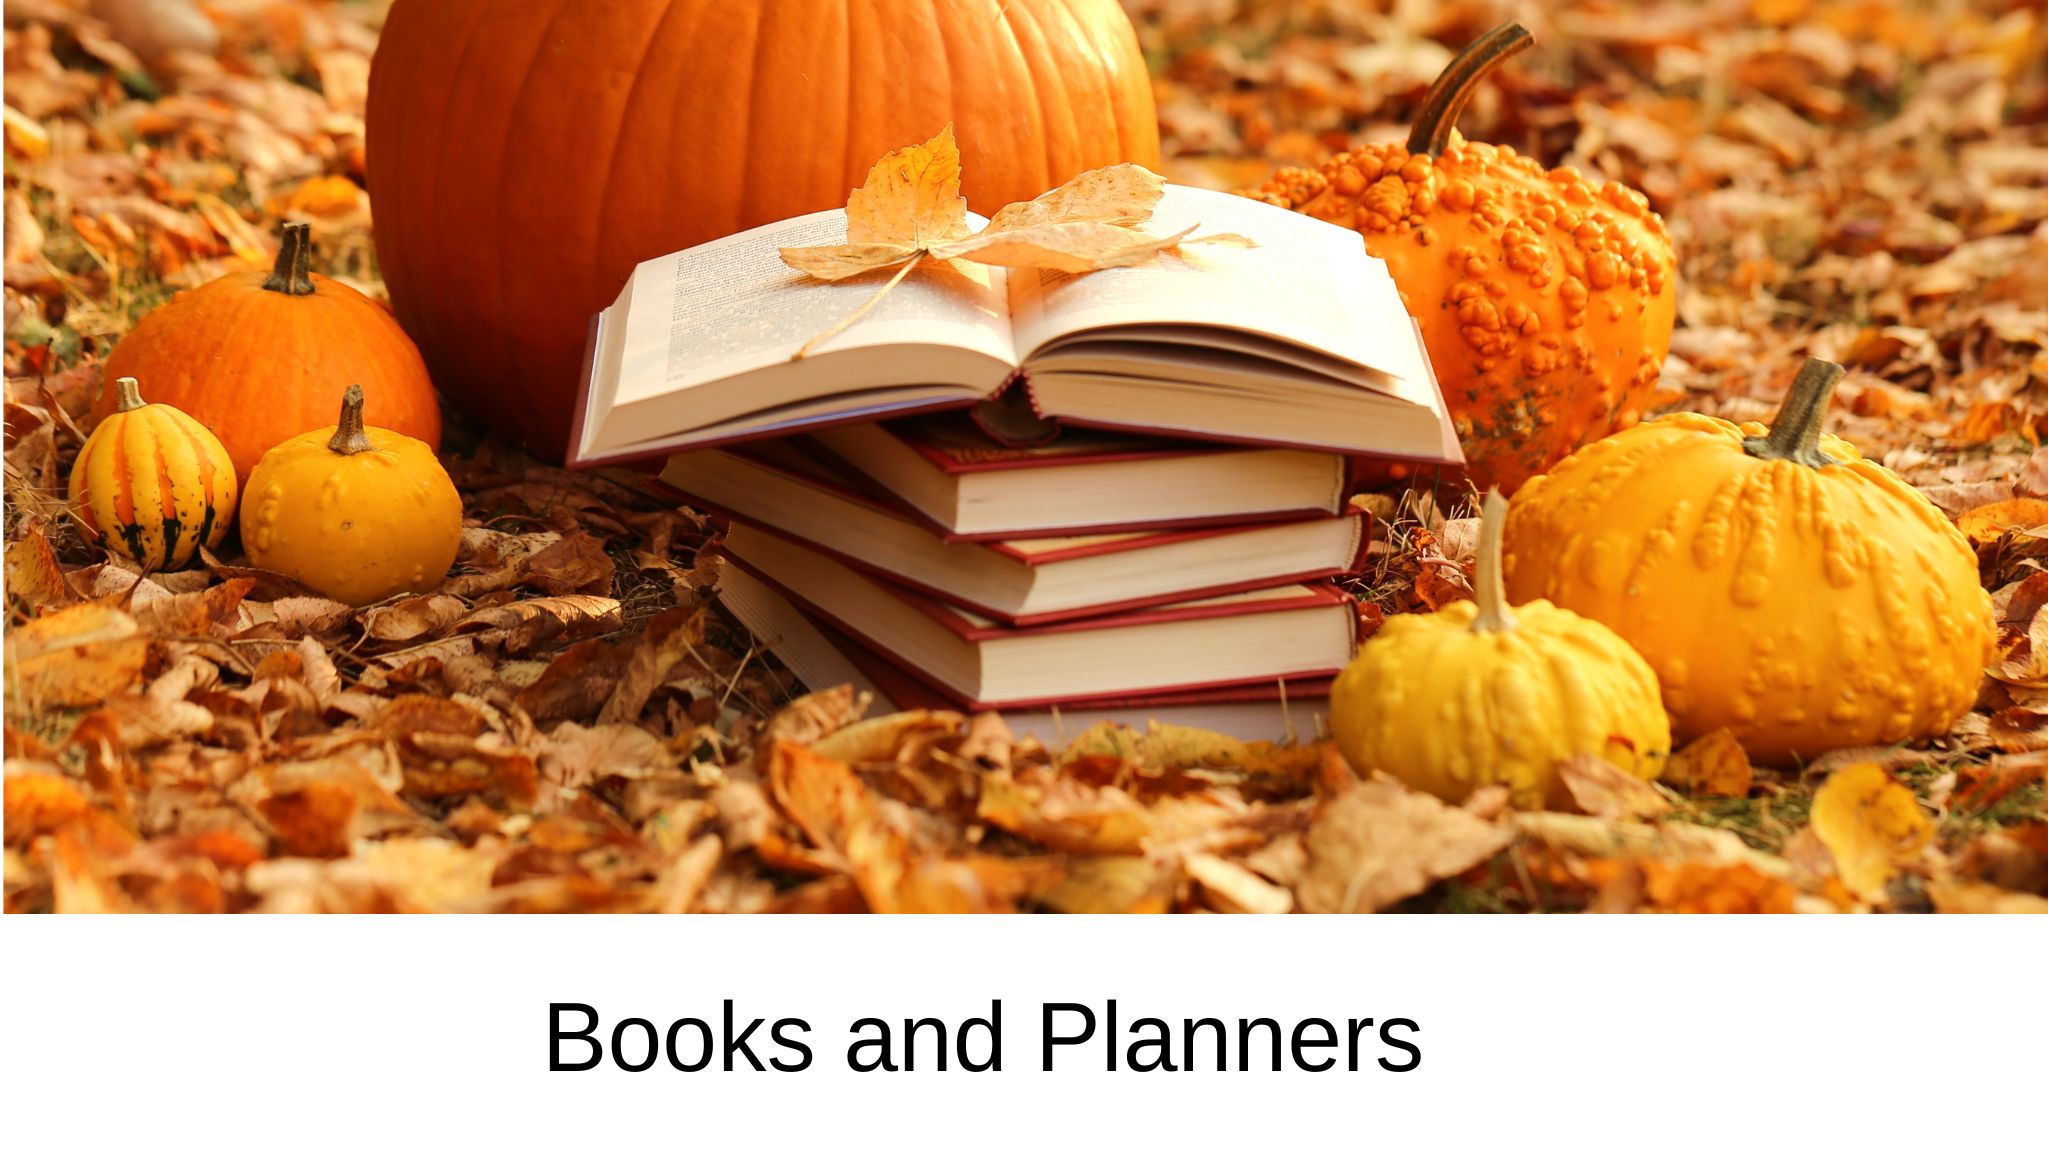 Books and Planners